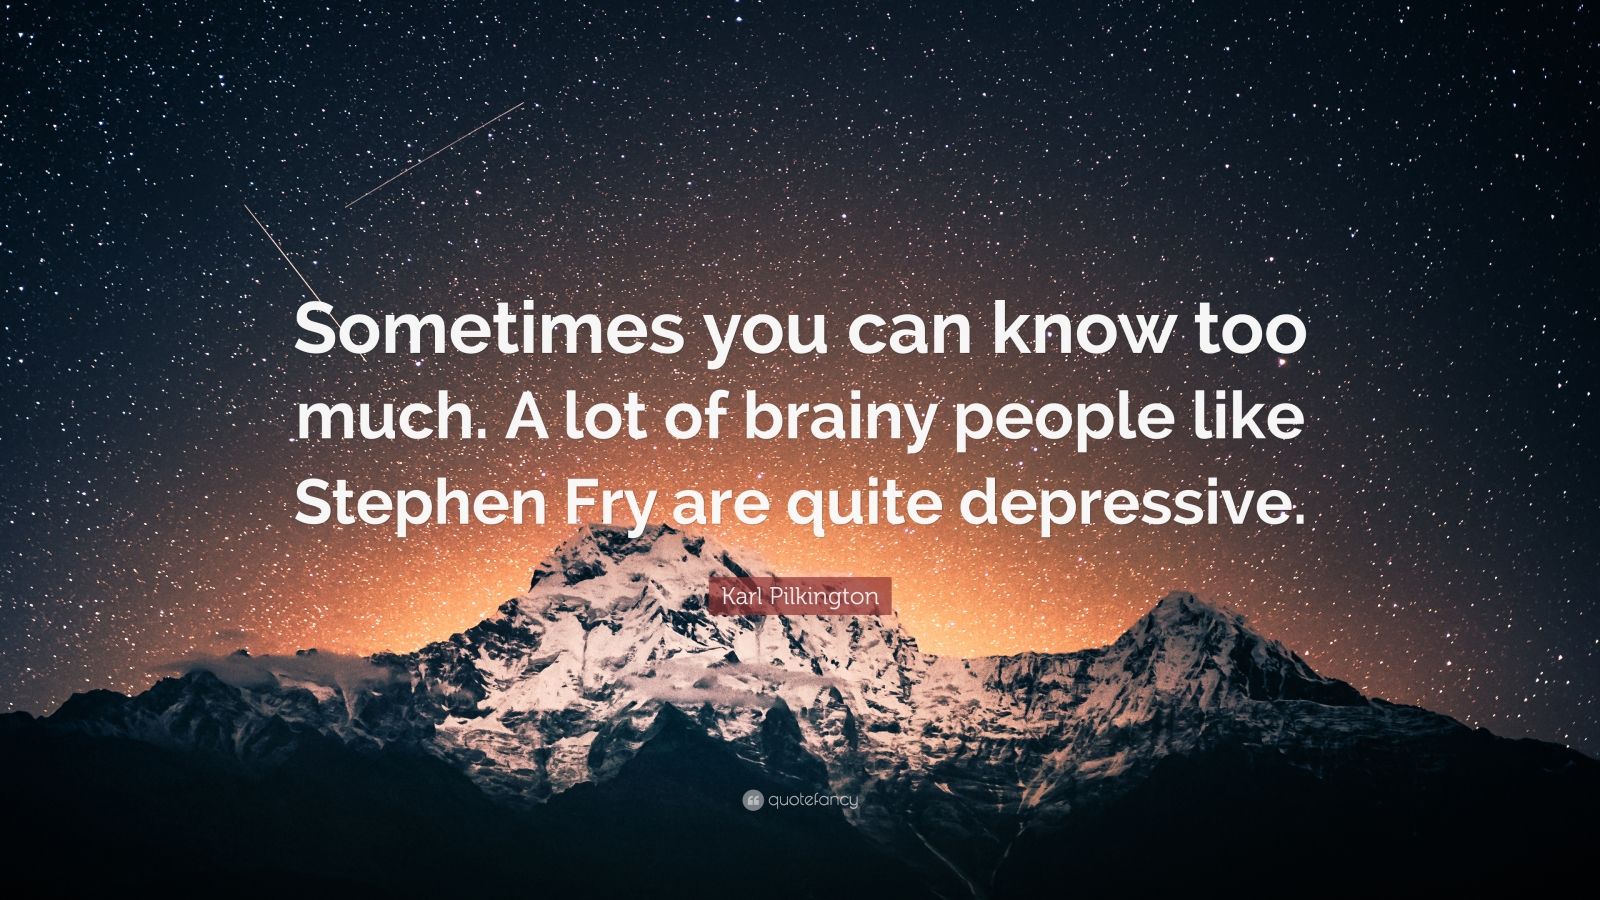 Karl Pilkington Quote: “Sometimes you can know too much. A lot of